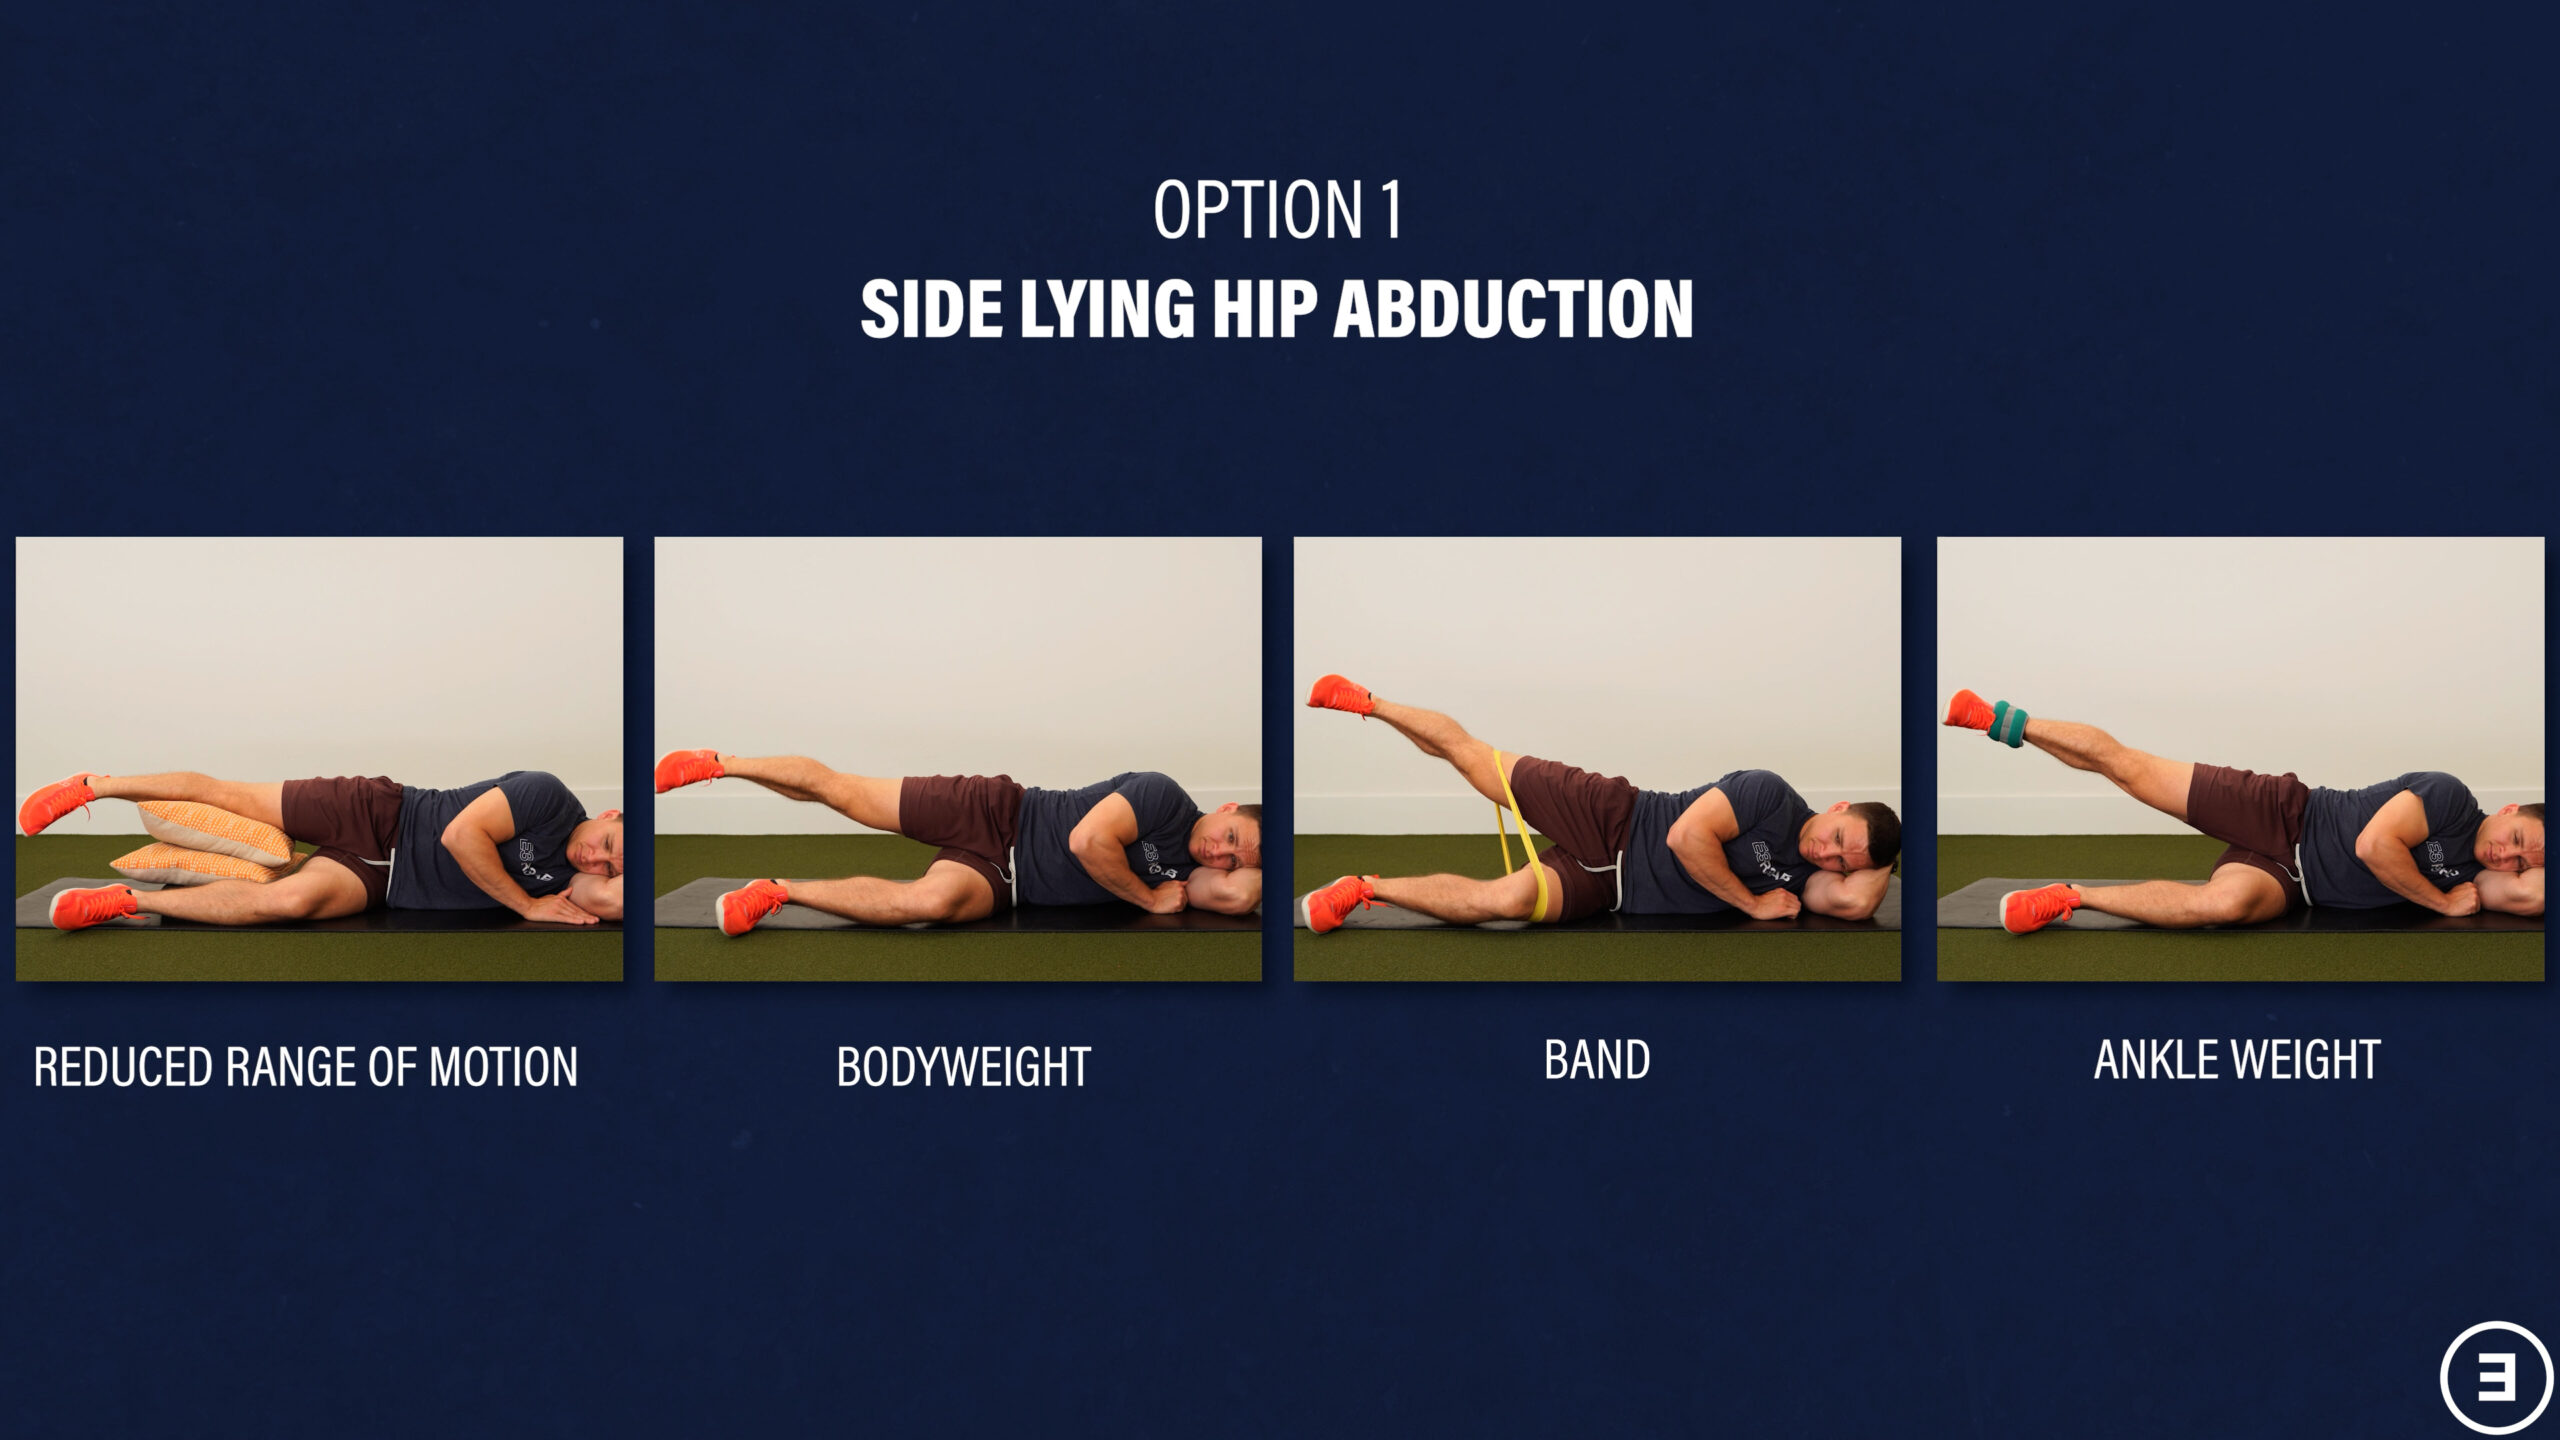 Hip exercises following hip fracture surgery (lying exercises)